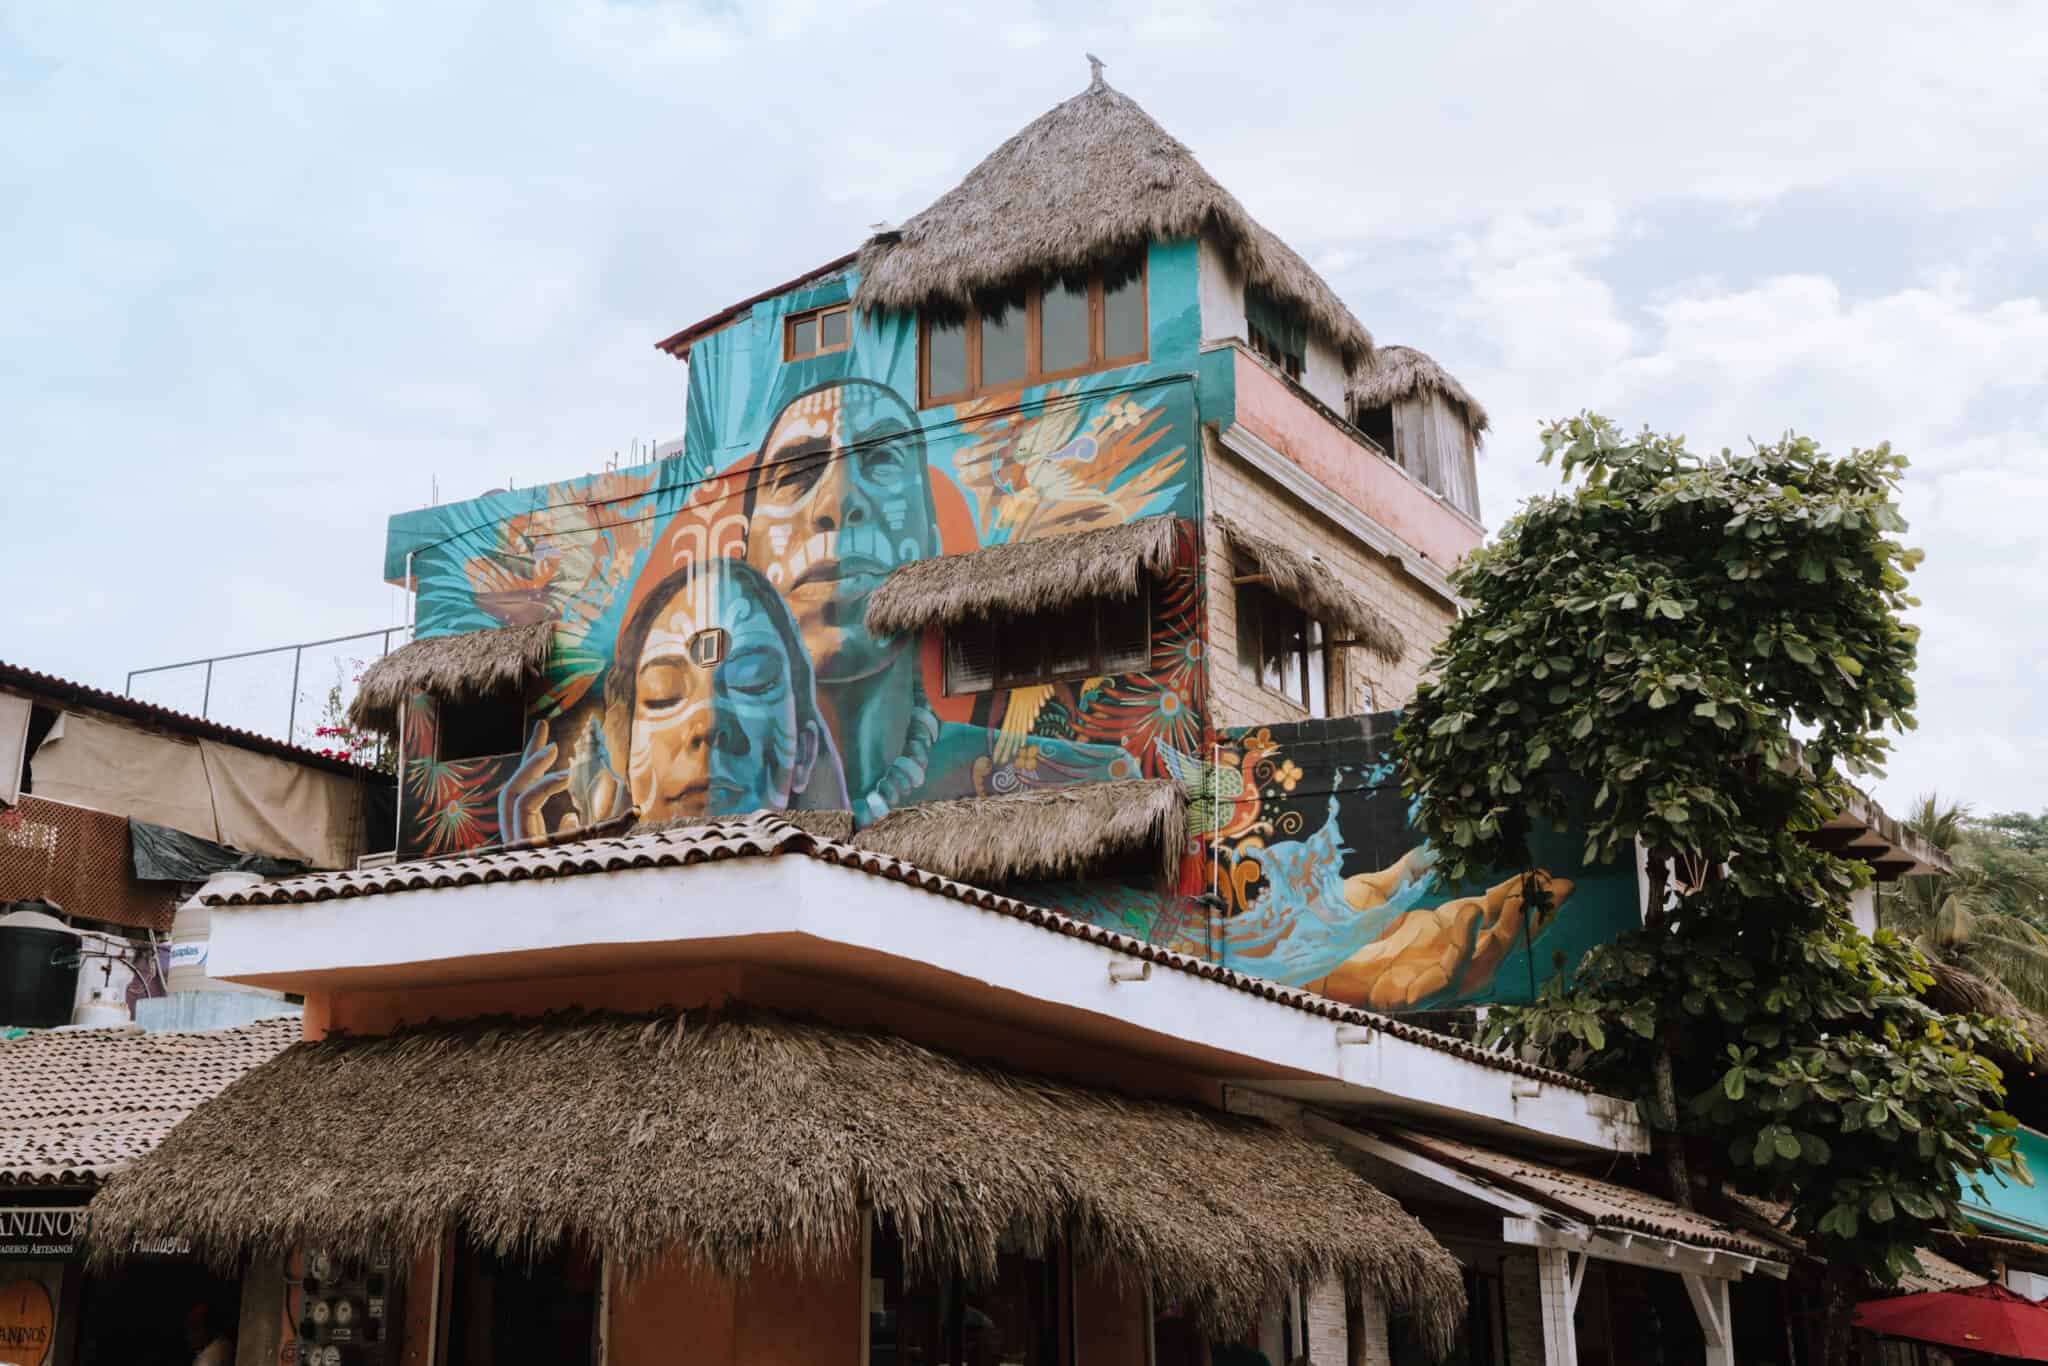 A Sayulita building with a mural on it and a thatched roof.